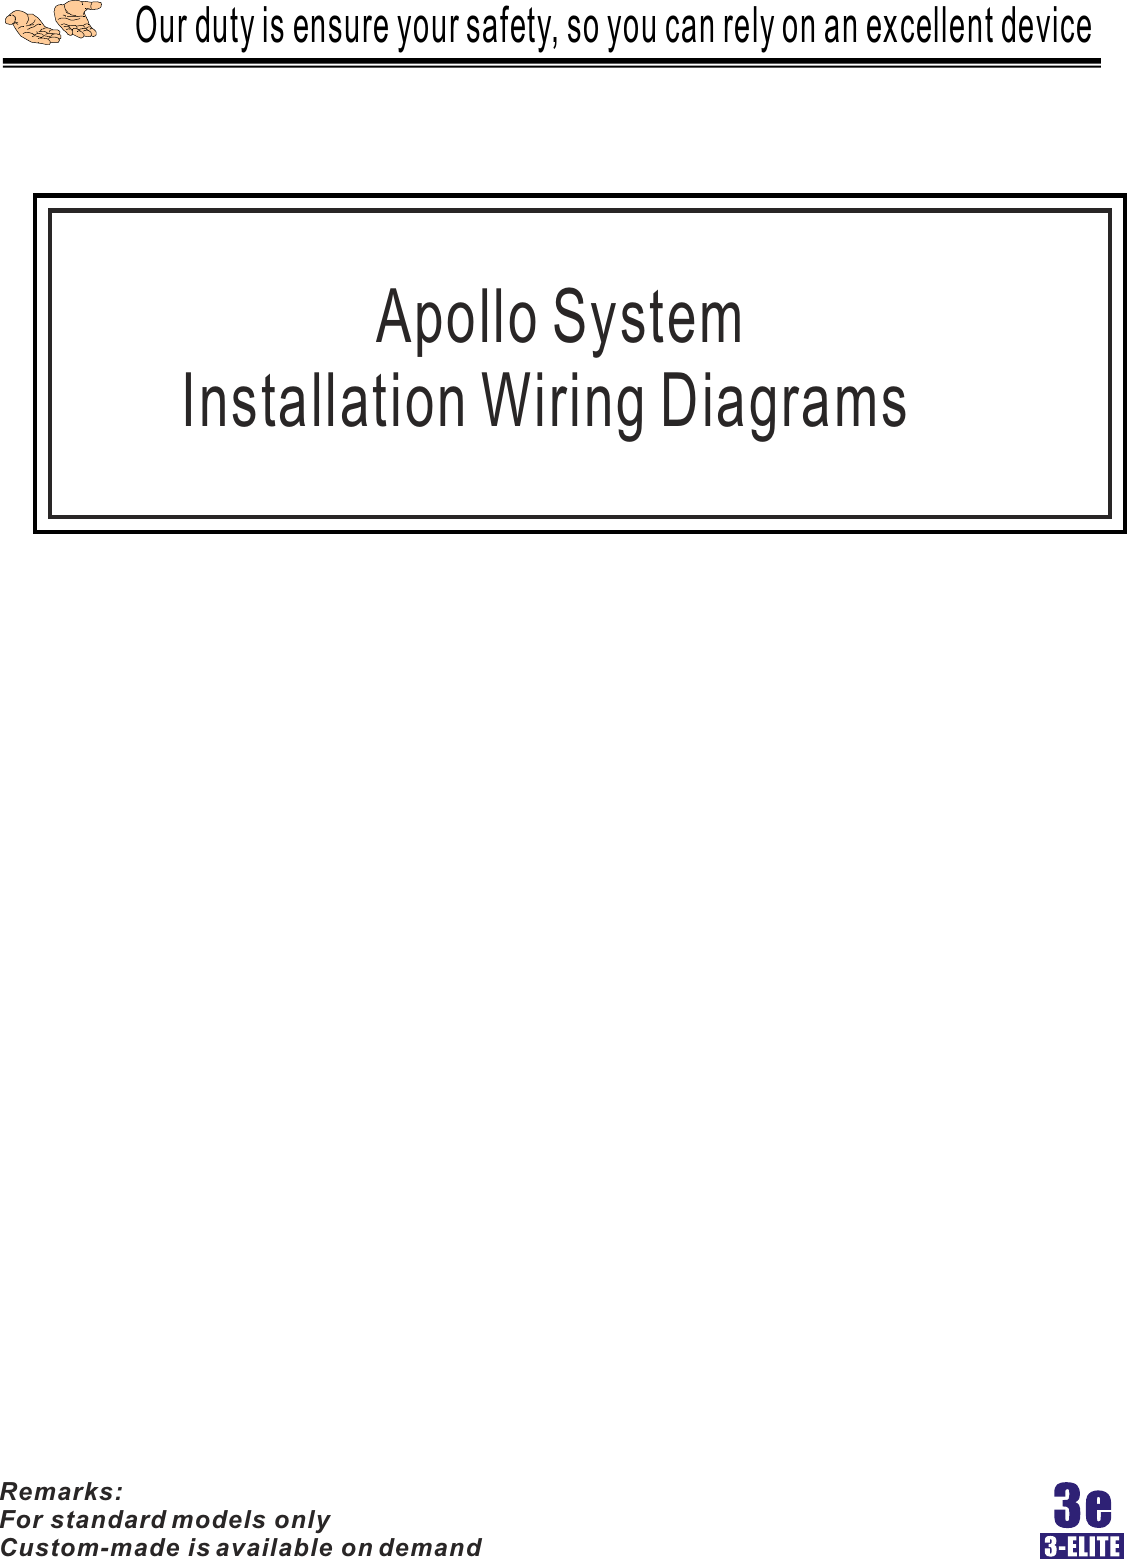     Our duty is ensure your safety, so you can rely on an excellent device                    Apollo System           Installation Wiring DiagramsRemarks:For standard models onlyCustom-made is available on demand